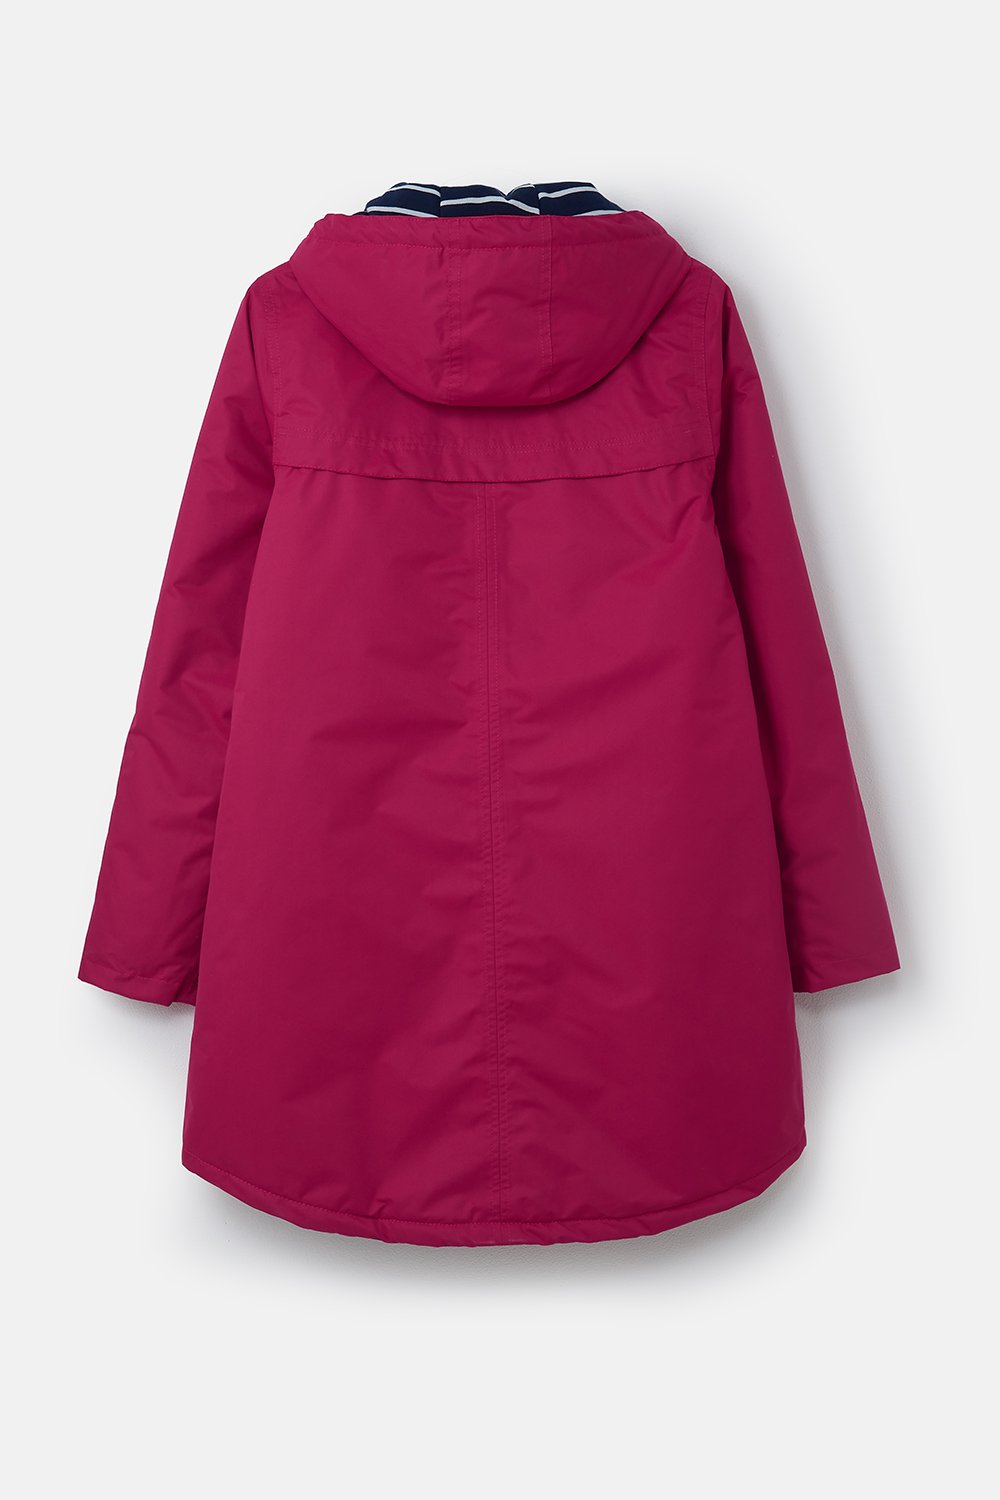 Lighthouse Iona Long Jacket in Raspberry